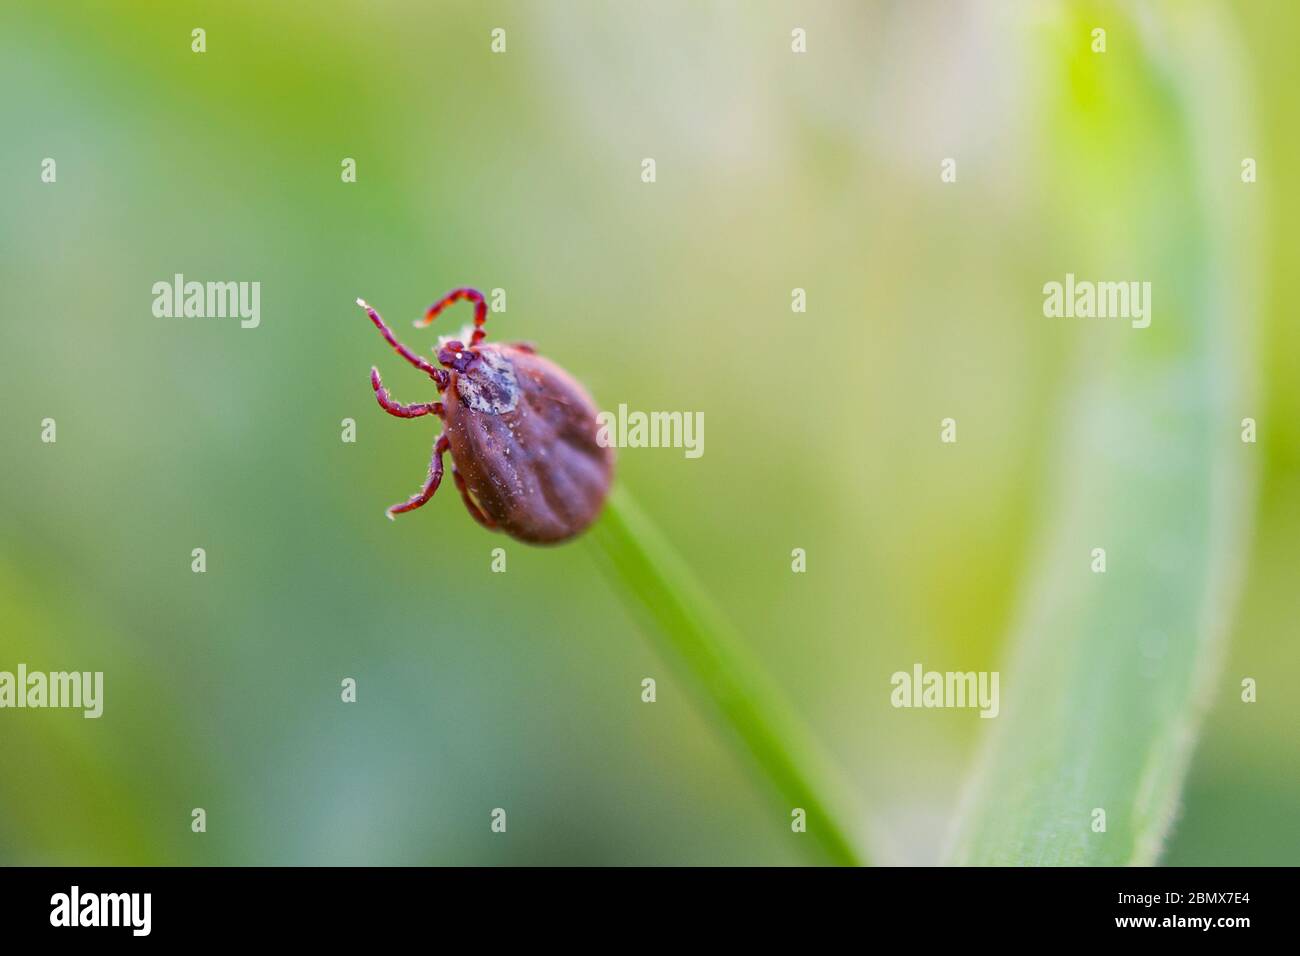 Deer tick sleeping on grass stalk. Ixodes ricinus. The dangerous parasite transmitted infections such as encephalitis and Lyme disease. Stock Photo